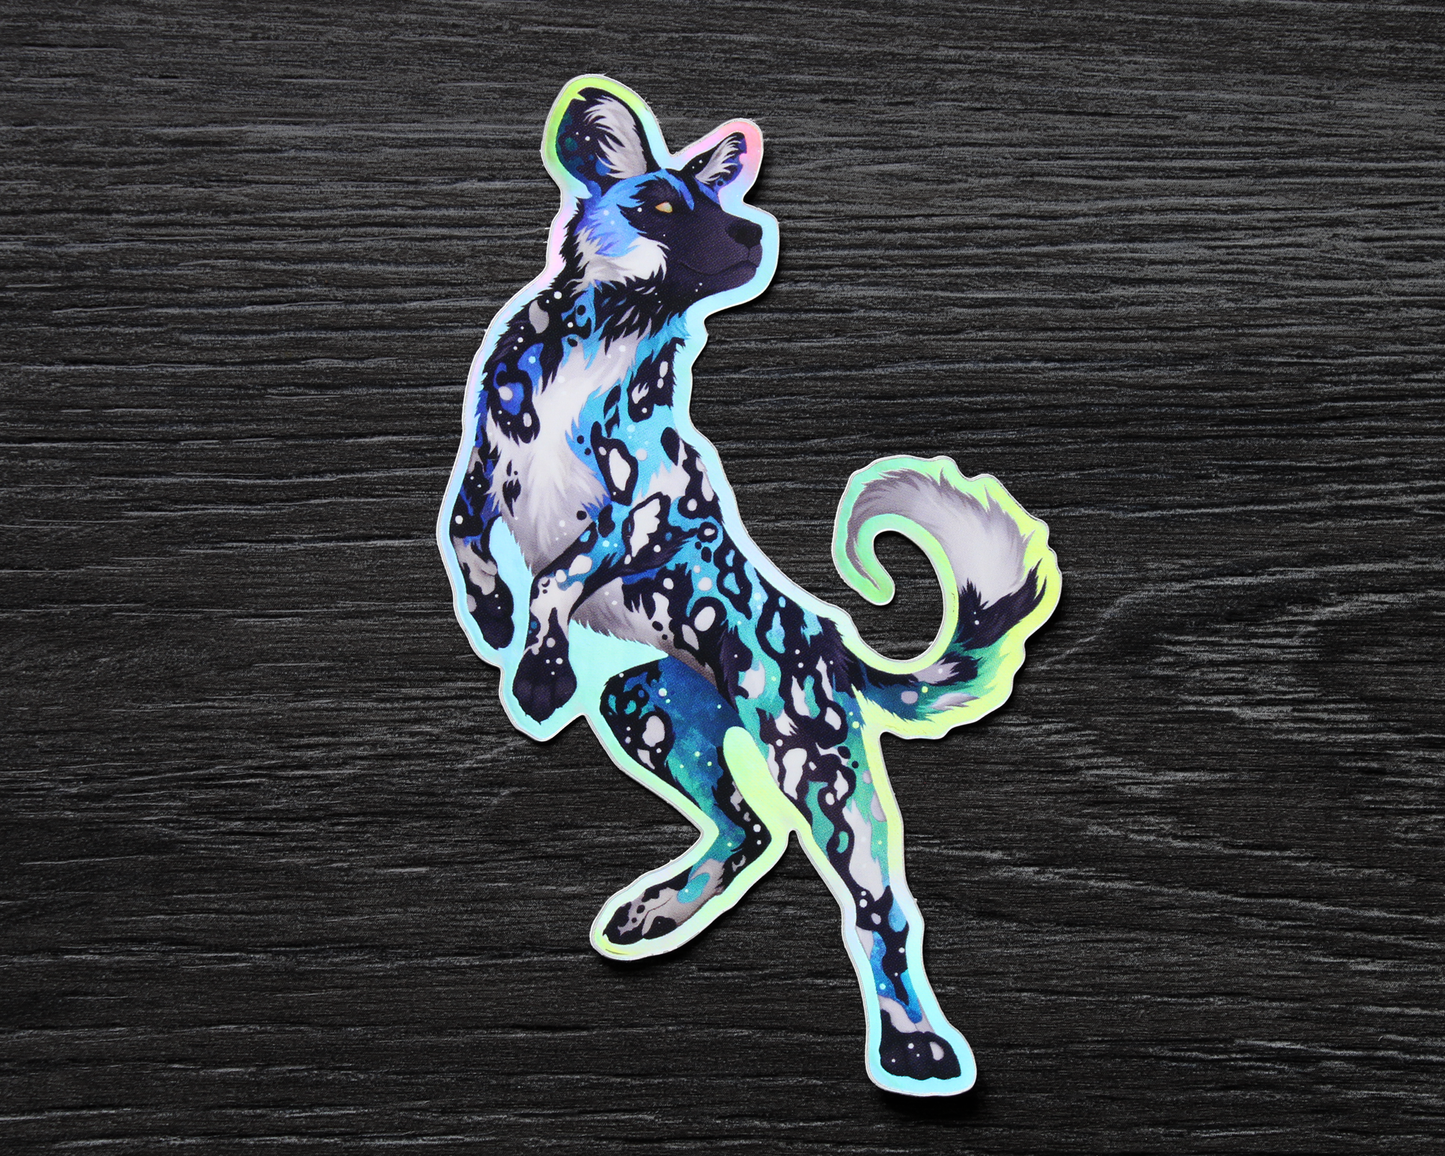 Cosmic Painted Dogs Vinyl Stickers